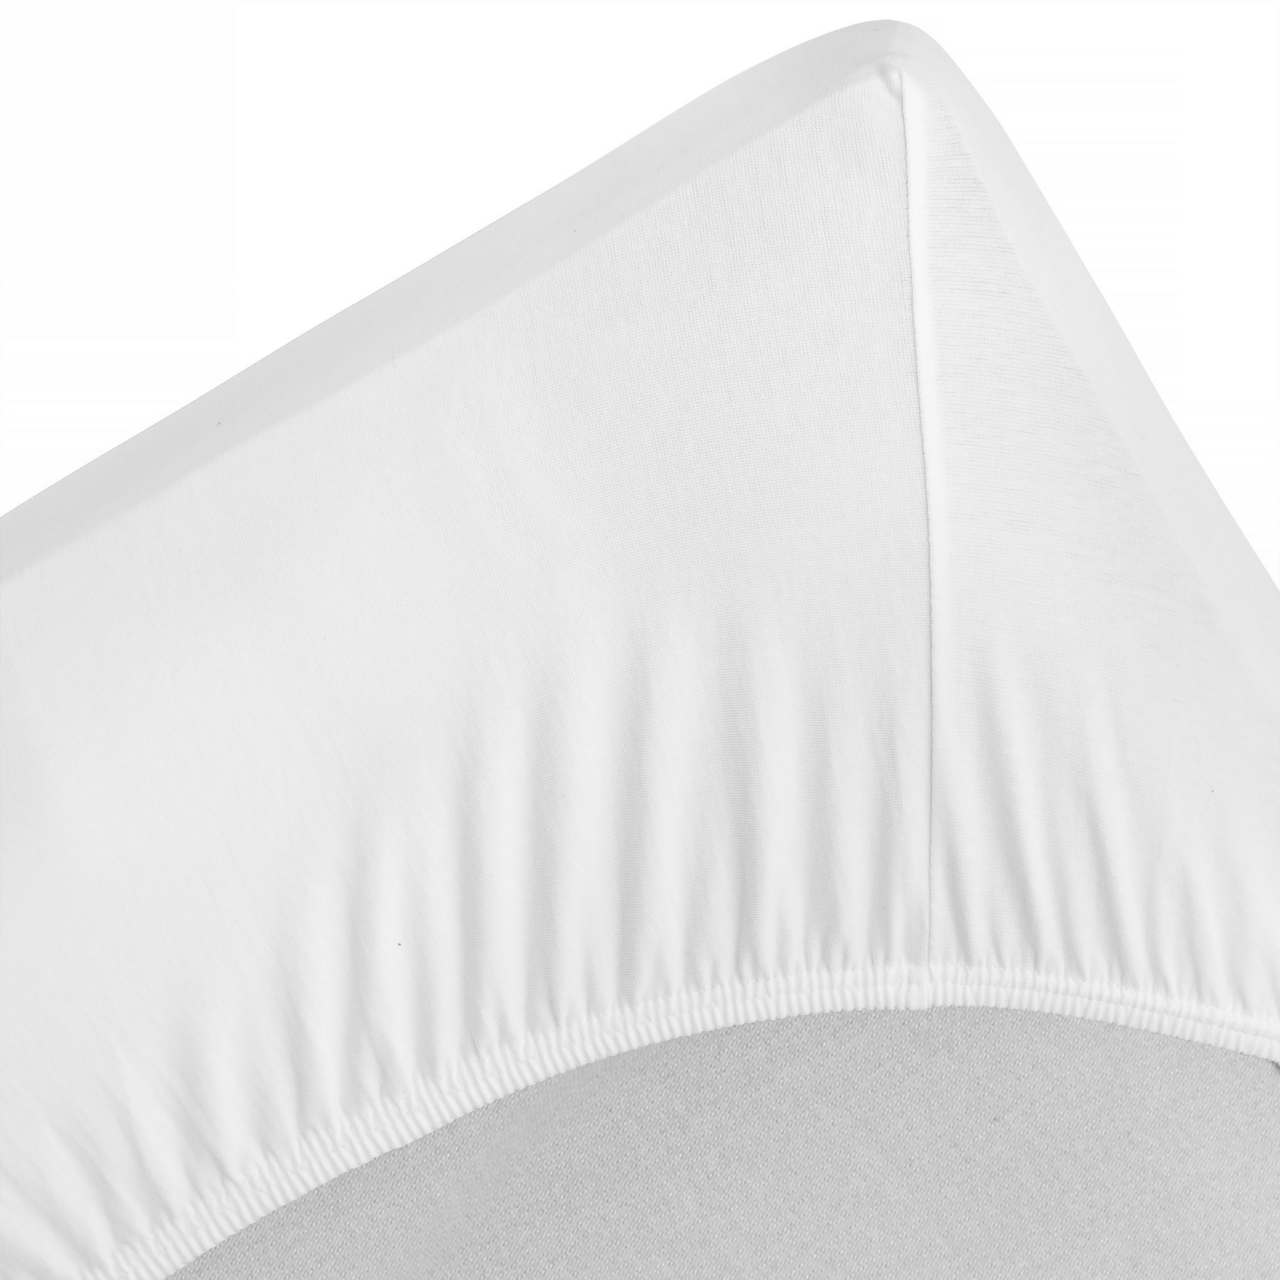 Mattress Cover, fitted sheet 90x200 cm white